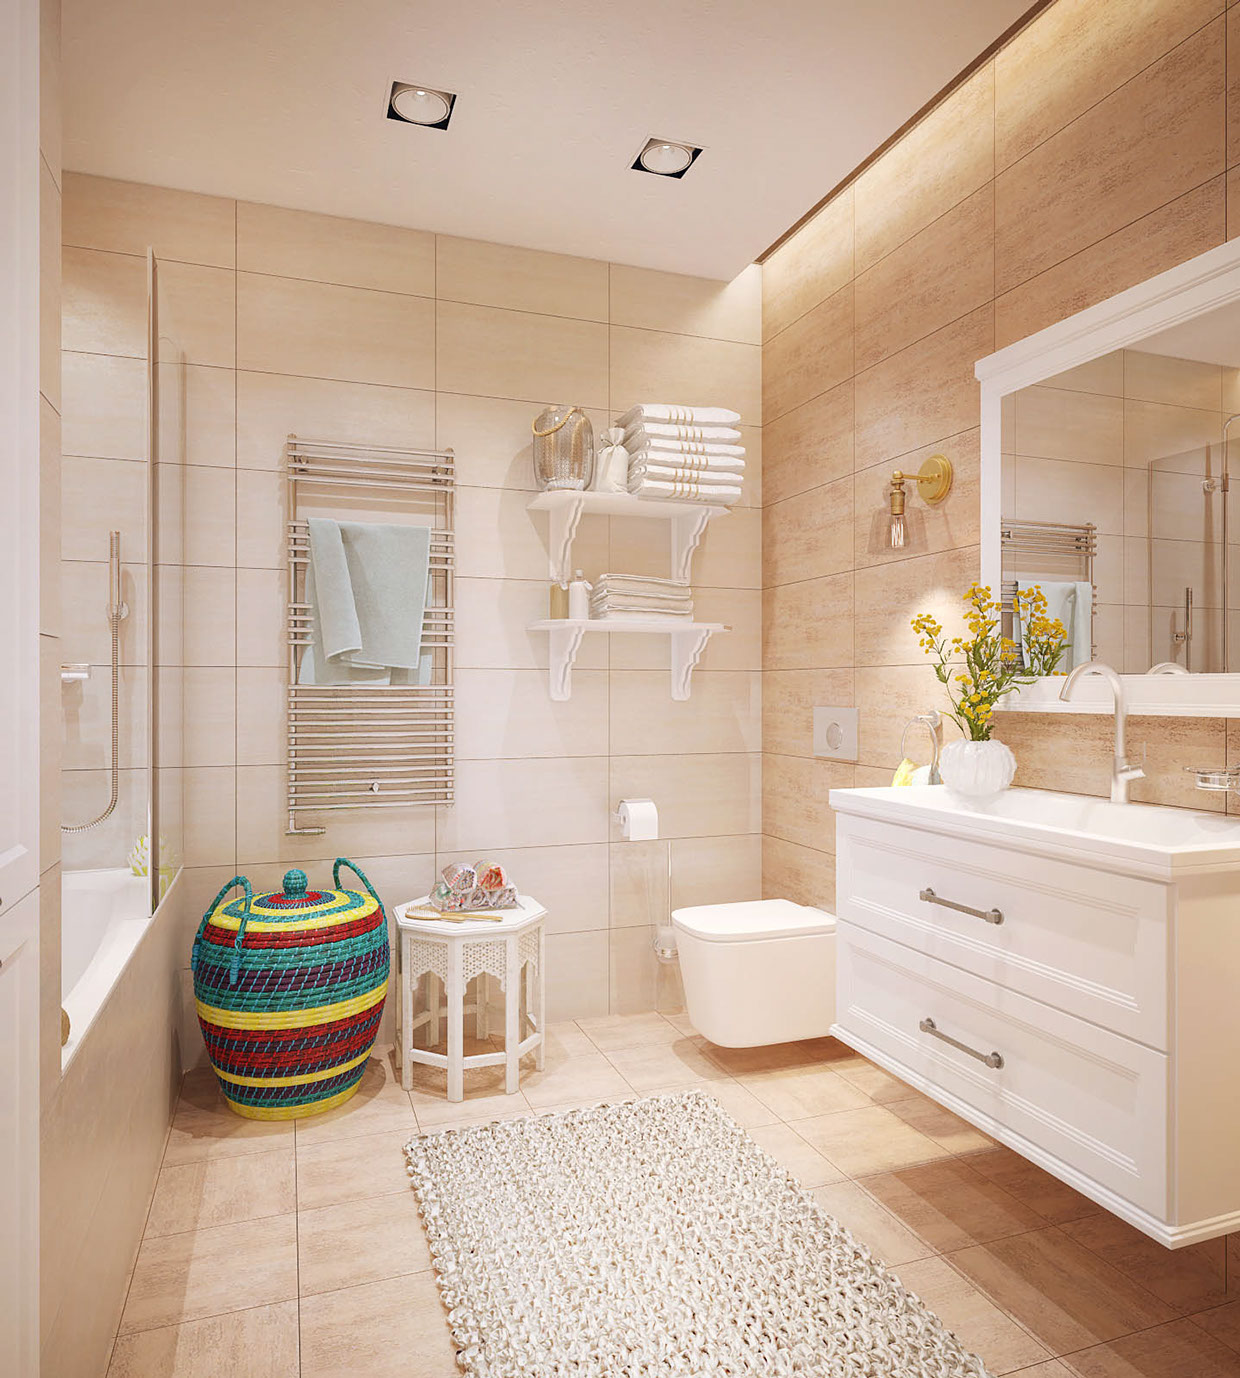 Pastel color modern bathroom "width =" 1240 "height =" 1378 "srcset =" https://mileray.com/wp-content/uploads/2020/05/1588516328_750_Applying-Modern-Bathroom-Decor-With-Creative-and-Perfect-Decorating-Which.jpg 1240w, https://mileray.com / wp-content / uploads / 2016/09 / Pavel-Voytov2-270x300.jpg 270w, https://mileray.com/wp-content/uploads/2016/09/Pavel-Voytov2-768x853.jpg 768w, https: / / mileray.com/wp-content/uploads/2016/09/Pavel-Voytov2-921x1024.jpg 921w, https://mileray.com/wp-content/uploads/2016/09/Pavel-Voytov2-696x773.jpg 696w, https://mileray.com/wp-content/uploads/2016/09/Pavel-Voytov2-1068x1187.jpg 1068w, https://mileray.com/wp-content/uploads/2016/09/Pavel-Voytov2- 378x420 .jpg 378w "sizes =" (maximum width: 1240px) 100vw, 1240px